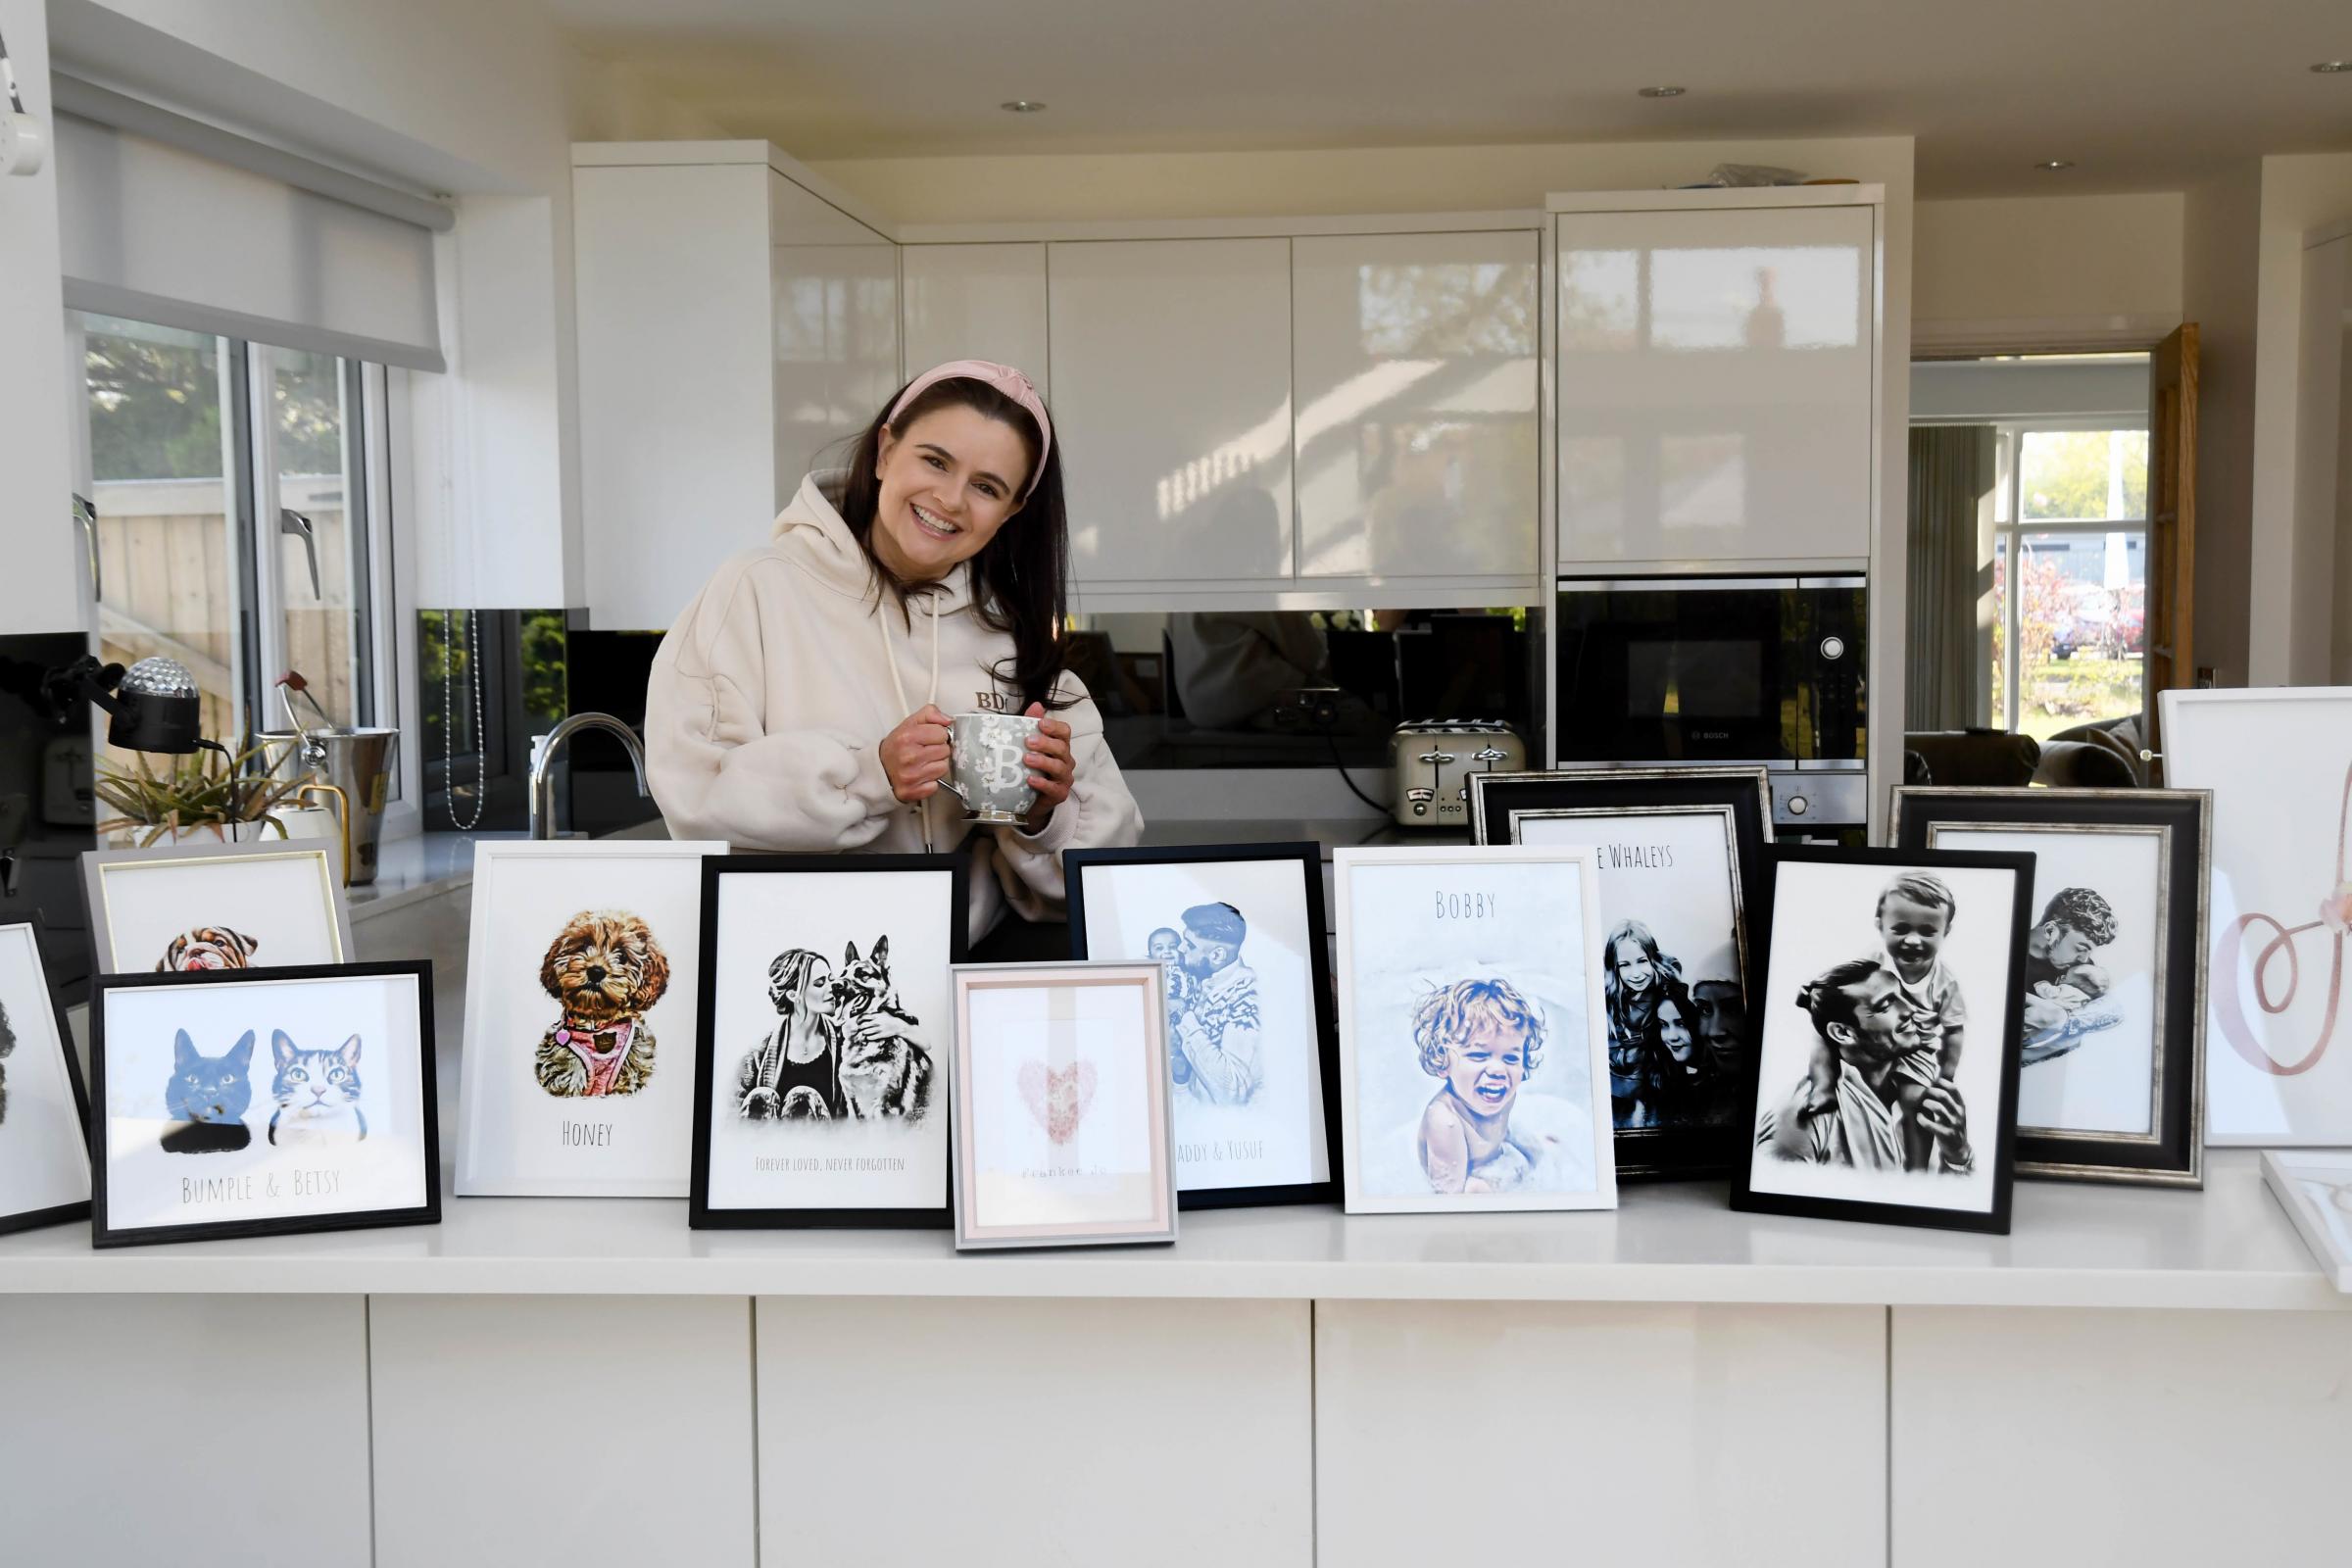 Becky Dutton-Geraghty has launched a very successful portrait business thanks to Covid